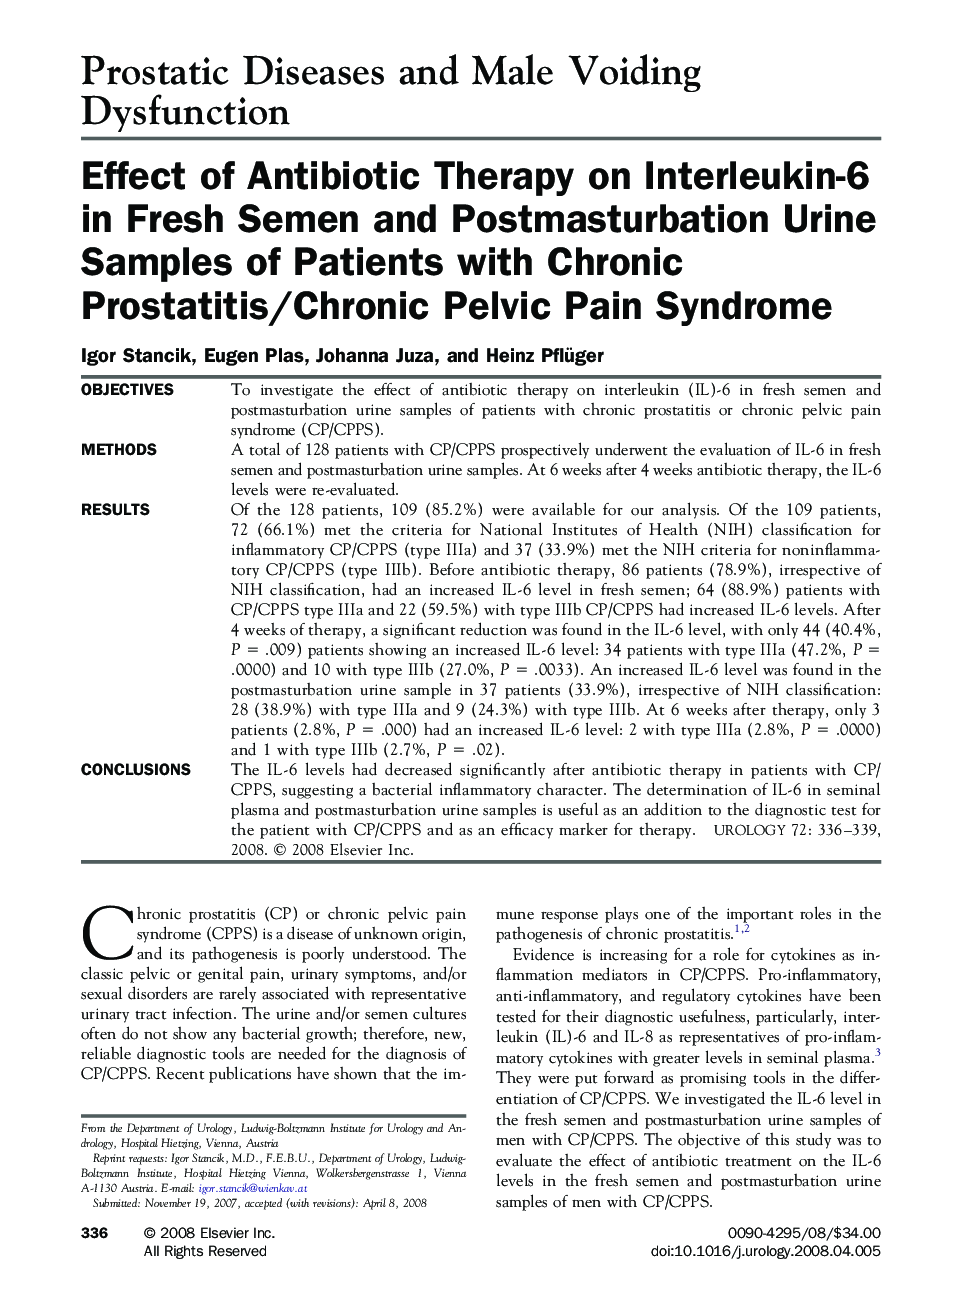 Effect of Antibiotic Therapy on Interleukin-6 in Fresh Semen and Postmasturbation Urine Samples of Patients with Chronic Prostatitis/Chronic Pelvic Pain Syndrome